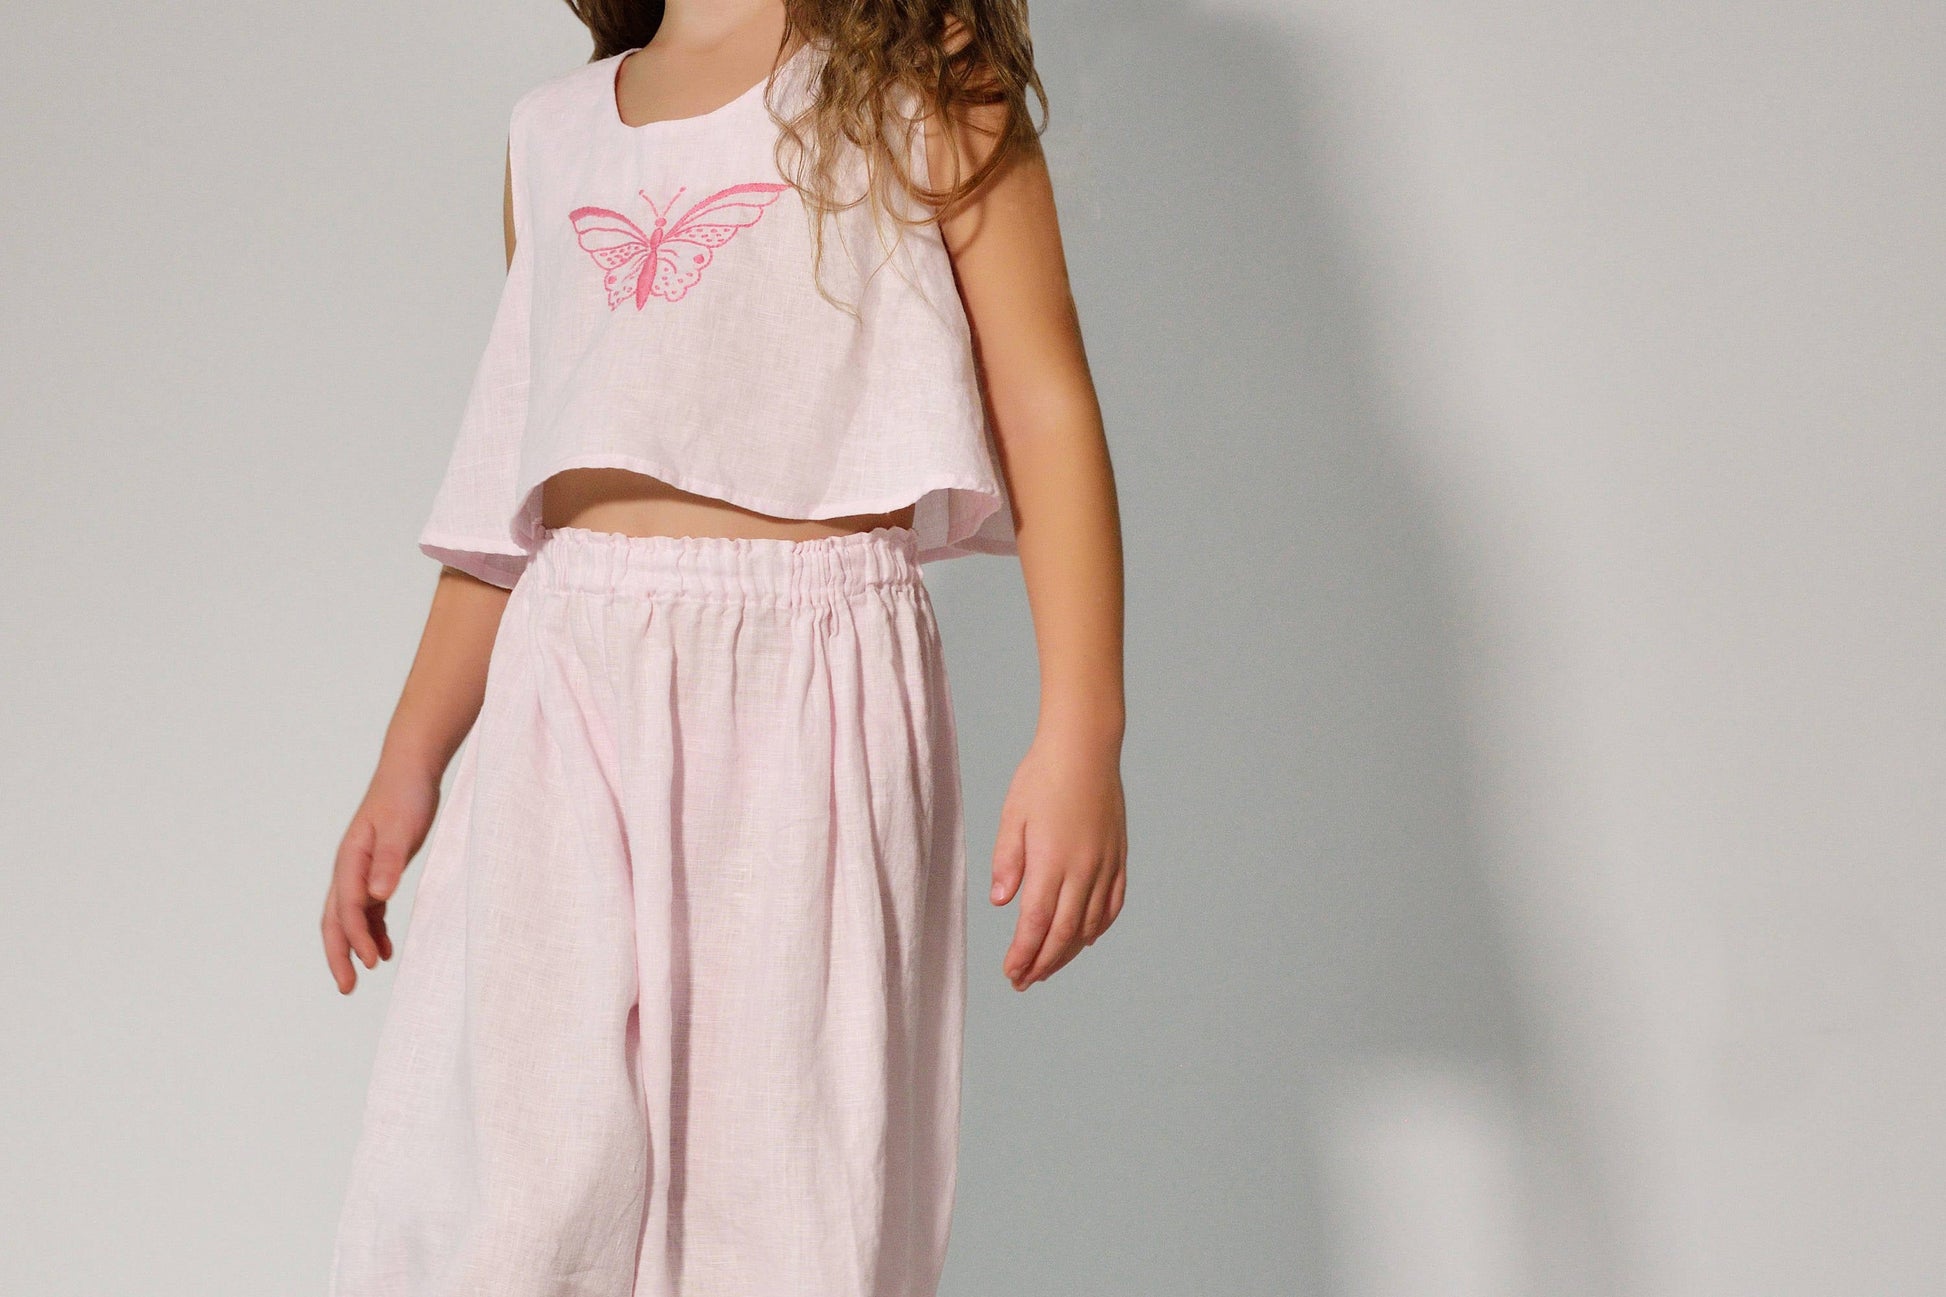 Linen Luxurious Pajama Set Butterfly For Girl/ Girl's Pajama with Handmade Embroidery